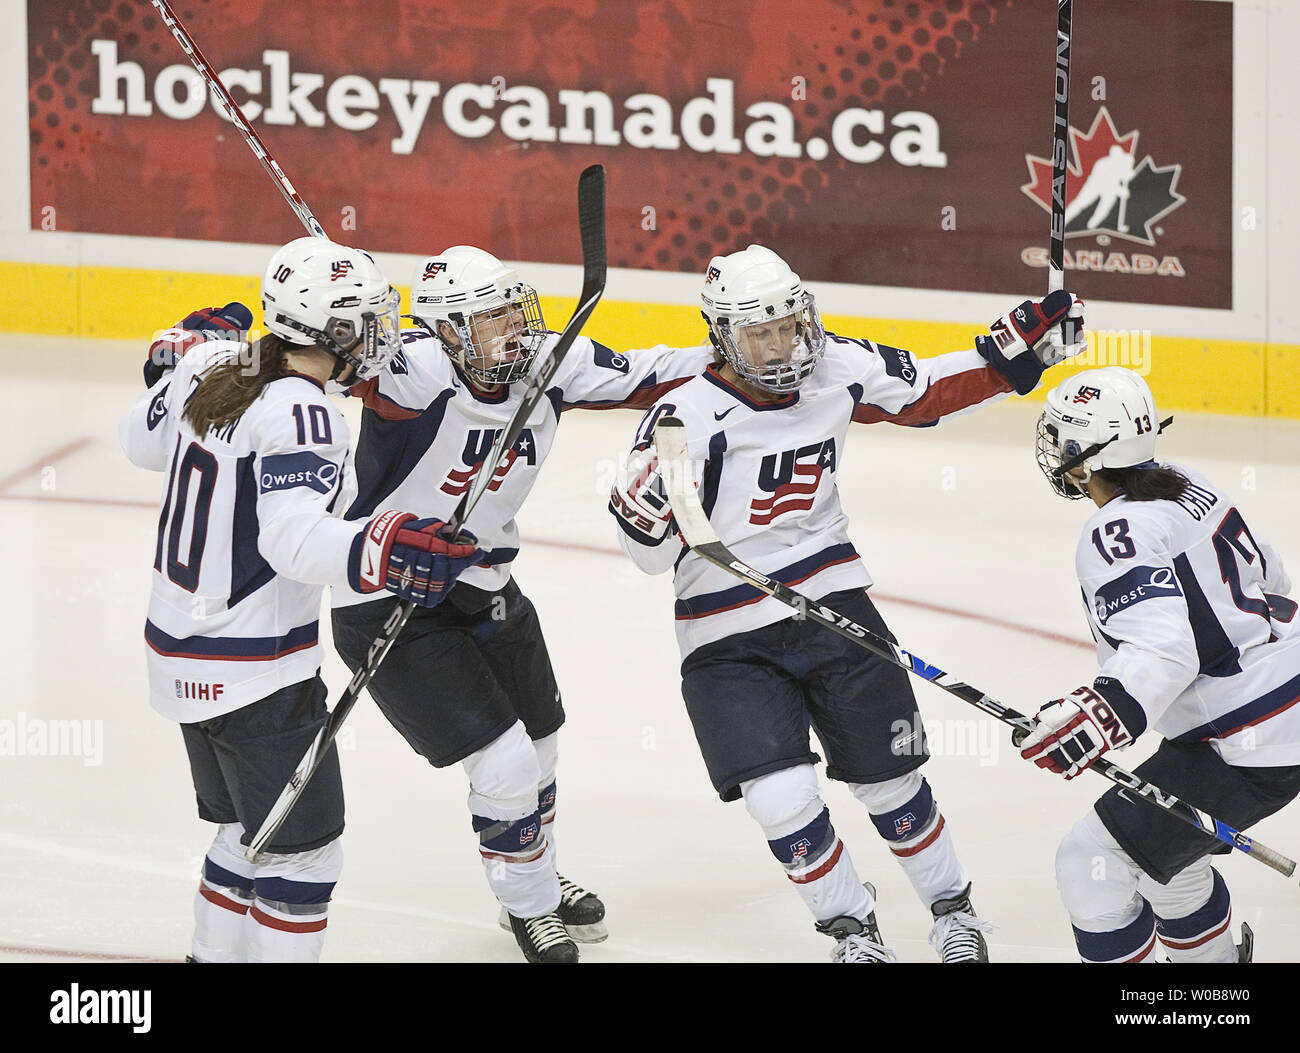 Team USA's Natalie Darwitz (Centre R.) celebrates scoring the winning goal against Team Canada with team mates Caitlin Cahow (Centre L.), Julie Chu (R) each with assists and Meghan Duggan during the third period of the Canada Cup Women's Hockey gold medal game at GM Place in Vancouver, British Columbia, September 6, 2009. Players have a chance to test the ice conditions at GM Place the main hockey venue for the 2010 Winter Olympics. UPI /Heinz Ruckemann Stock Photo